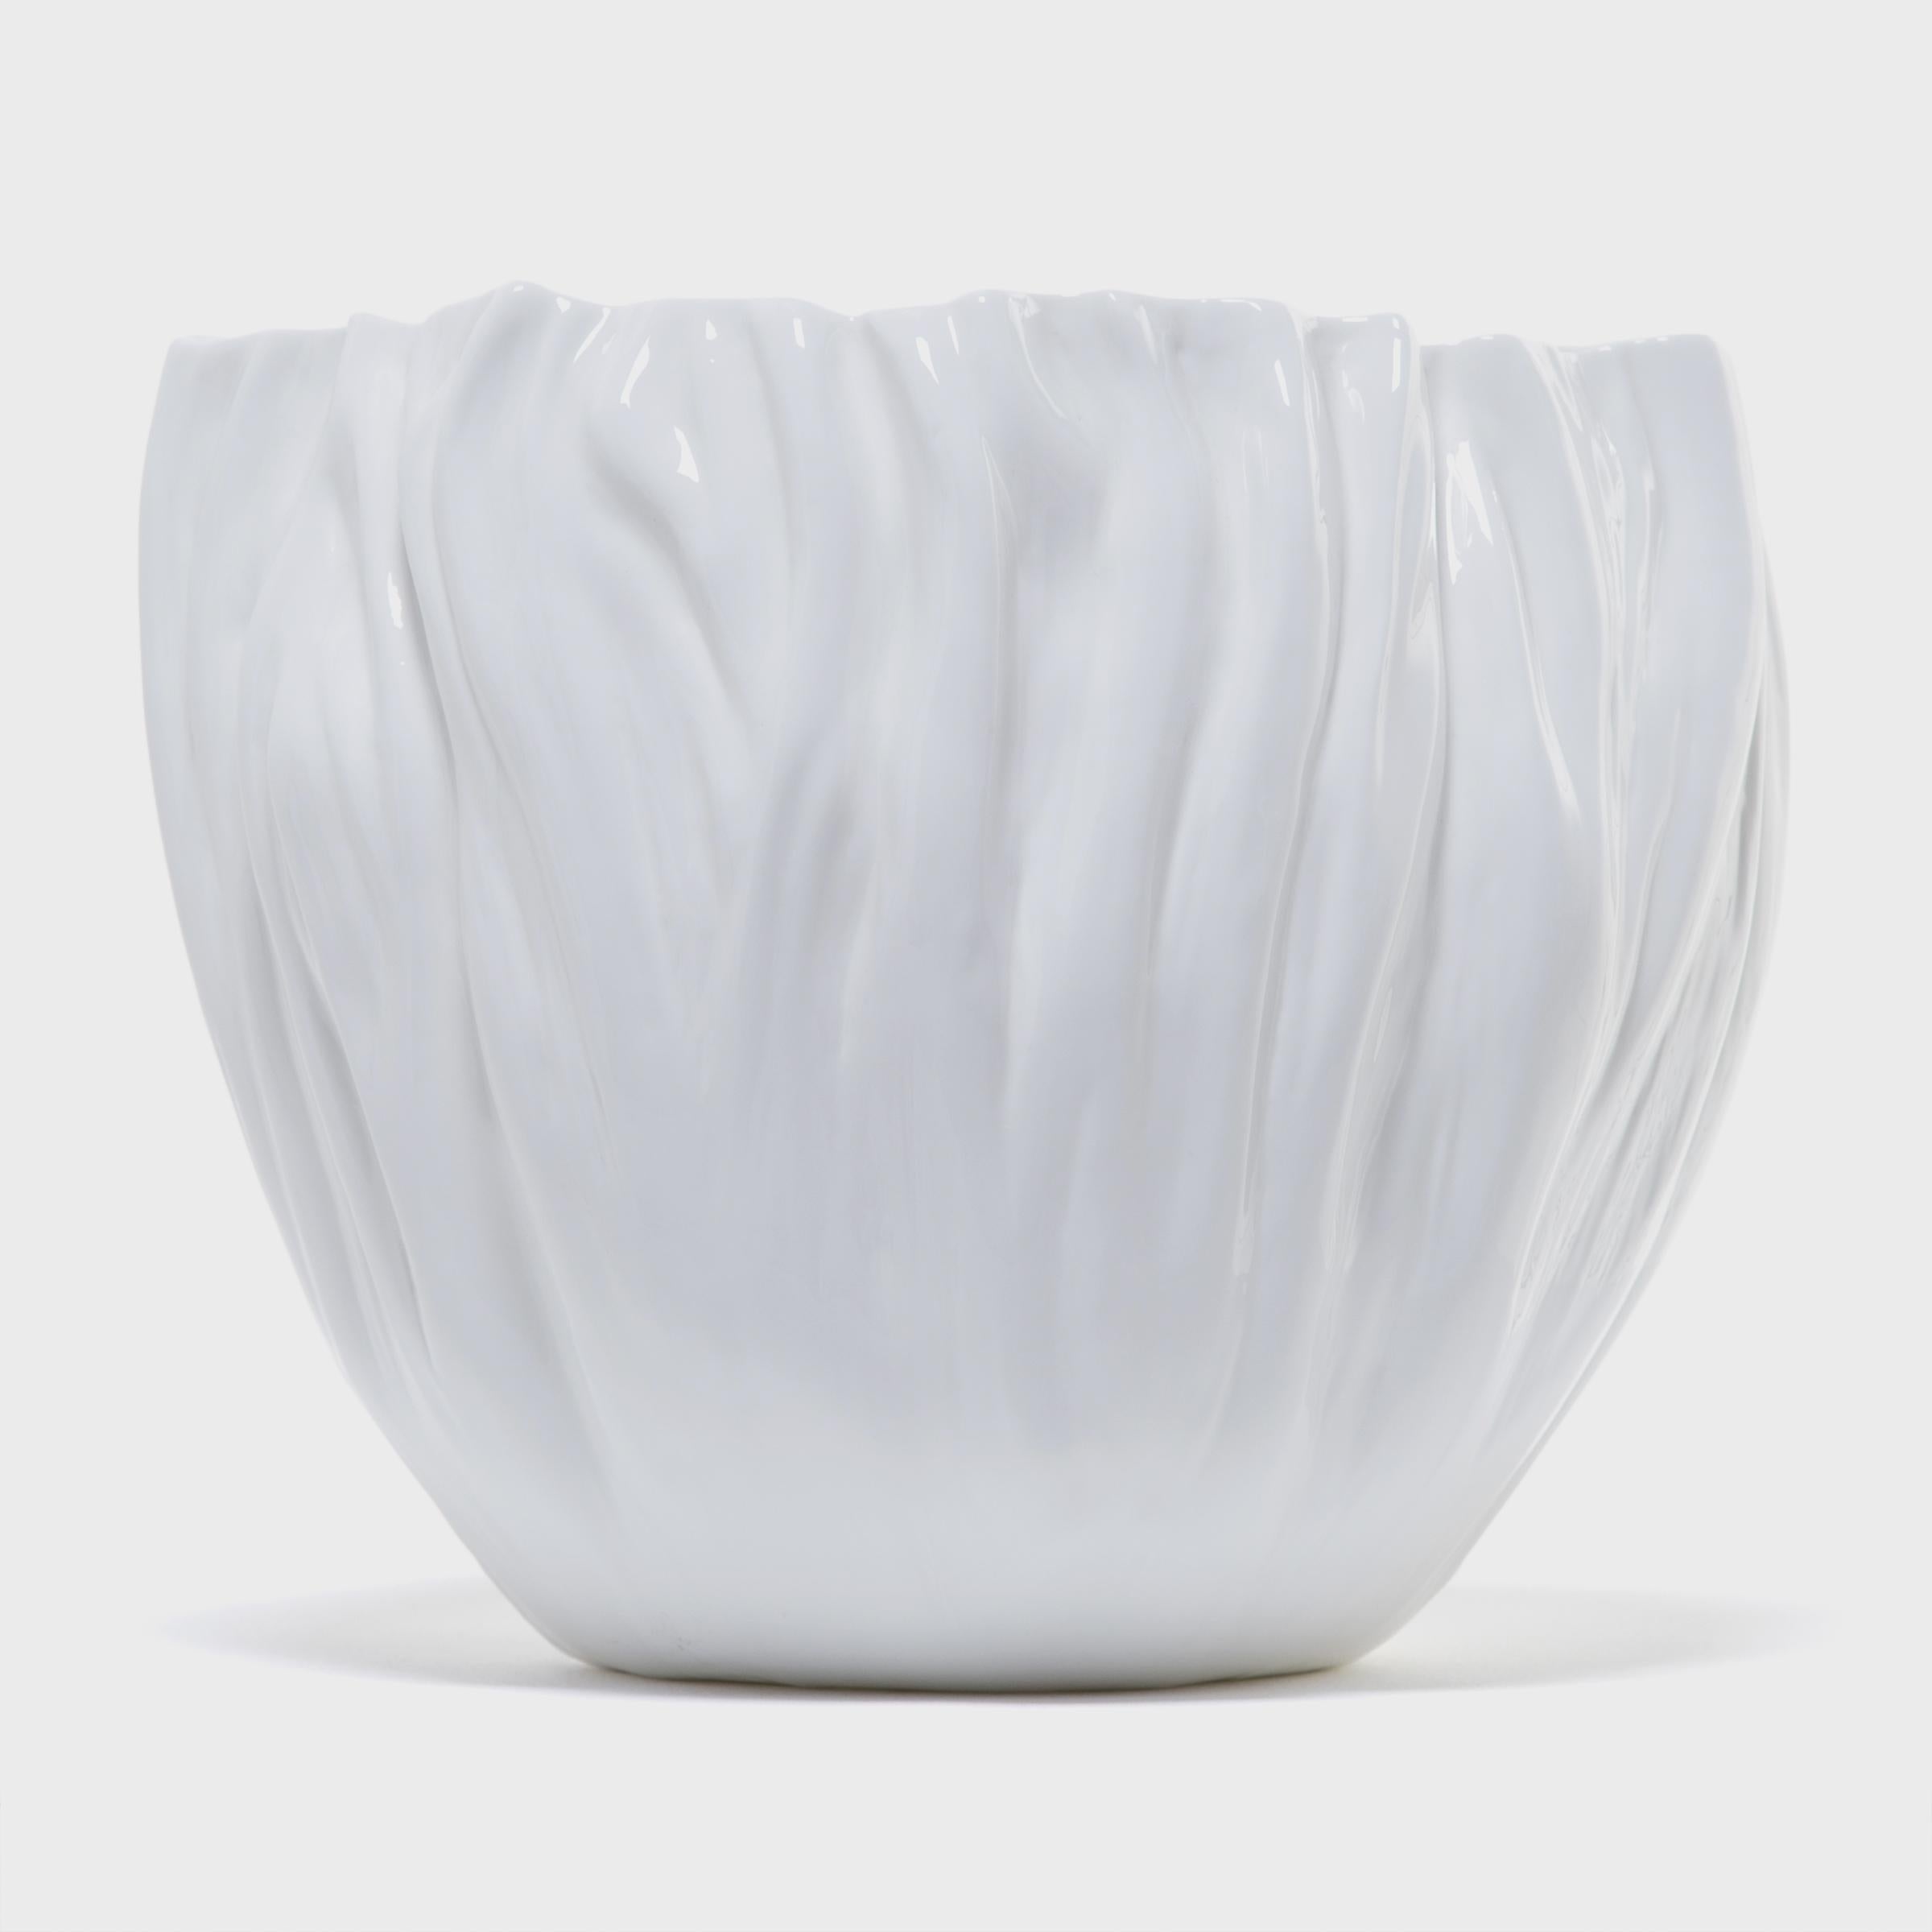 Tapping into a tradition of creating exceptionally fine porcelain that dates back to the 9th century A.D., Chinese artist Xie Dong has earned international acclaim for her captivating porcelain designs. Intrigued by all that is formless or ephemeral